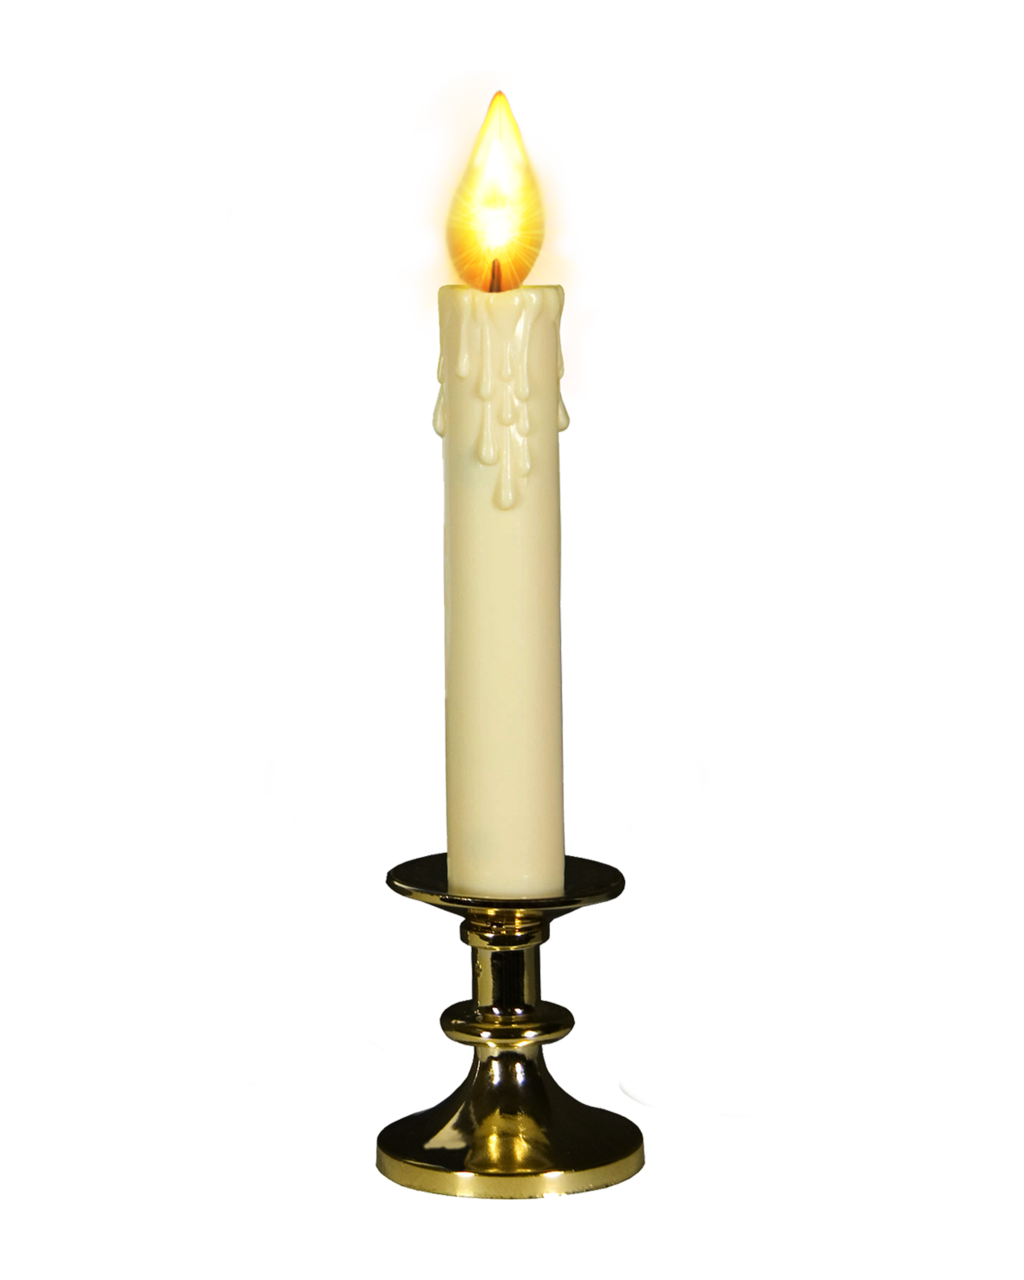 Church Candles Png Image PNG Image